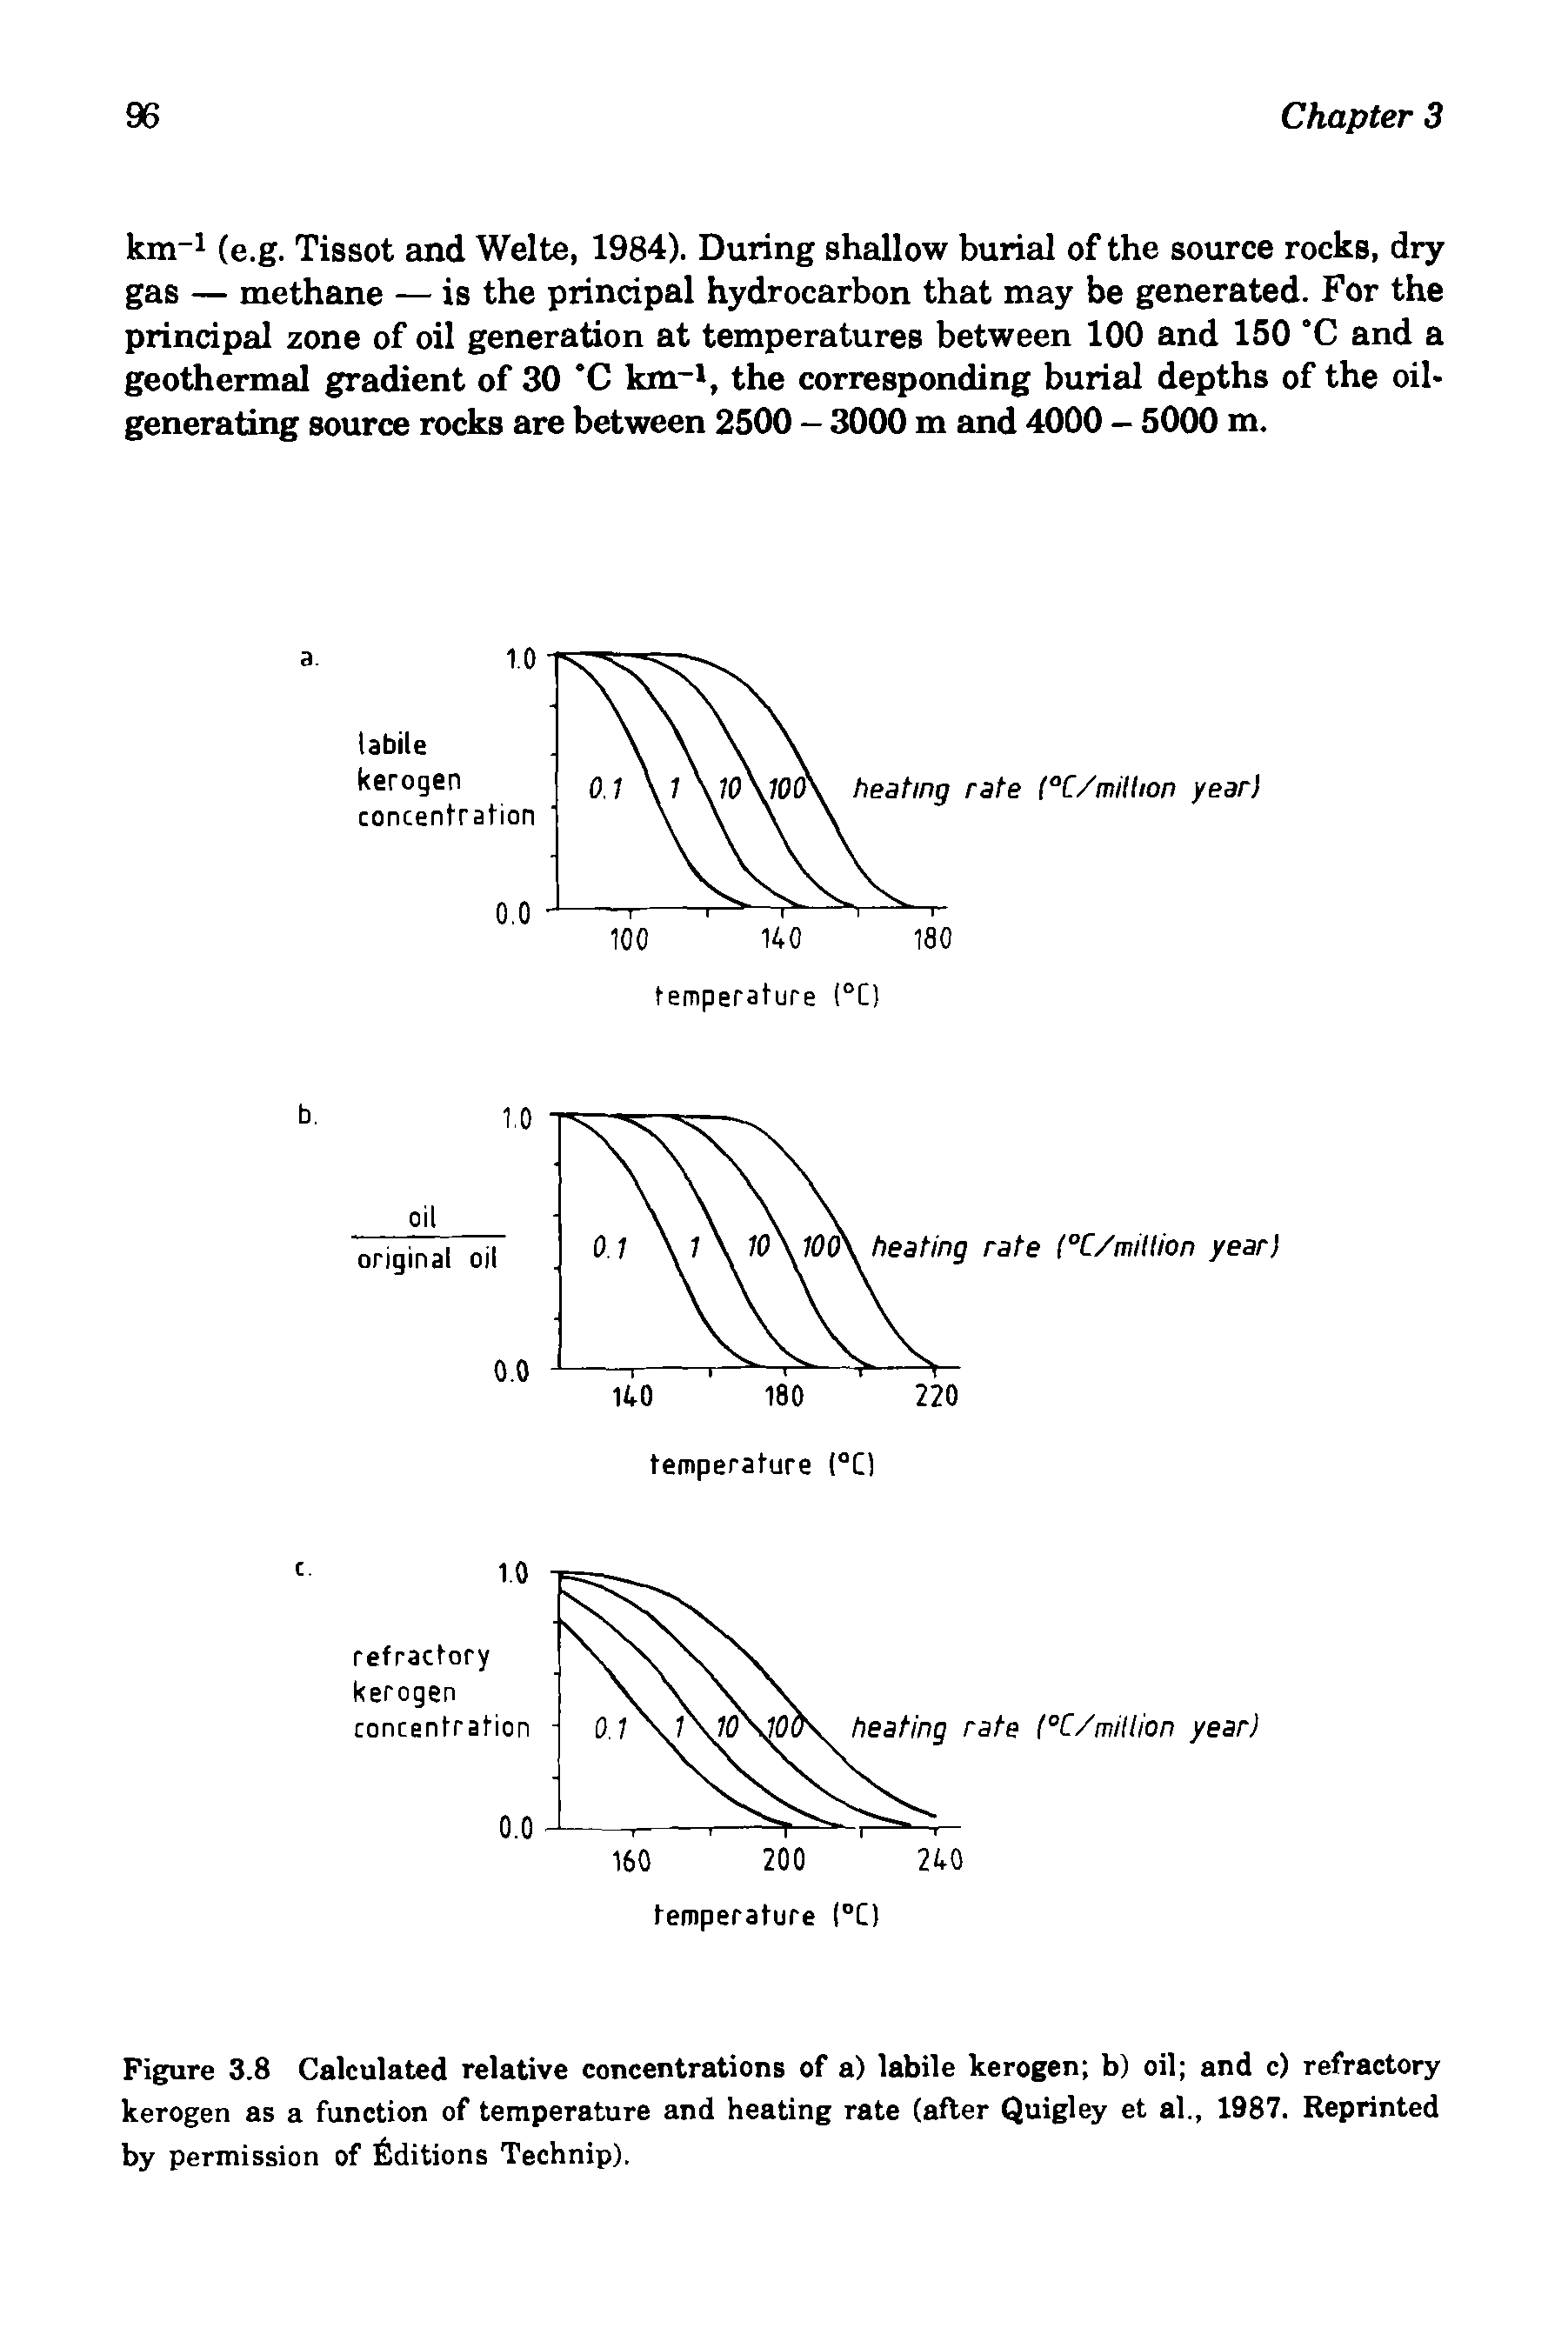 Figure 3.8 Calculated relative concentrations of a) labile kerogen b) oil and c) refractory kerogen as a function of temperature and heating rate (after Quigley et al., 1987. Reprinted by permission of Editions Technip).